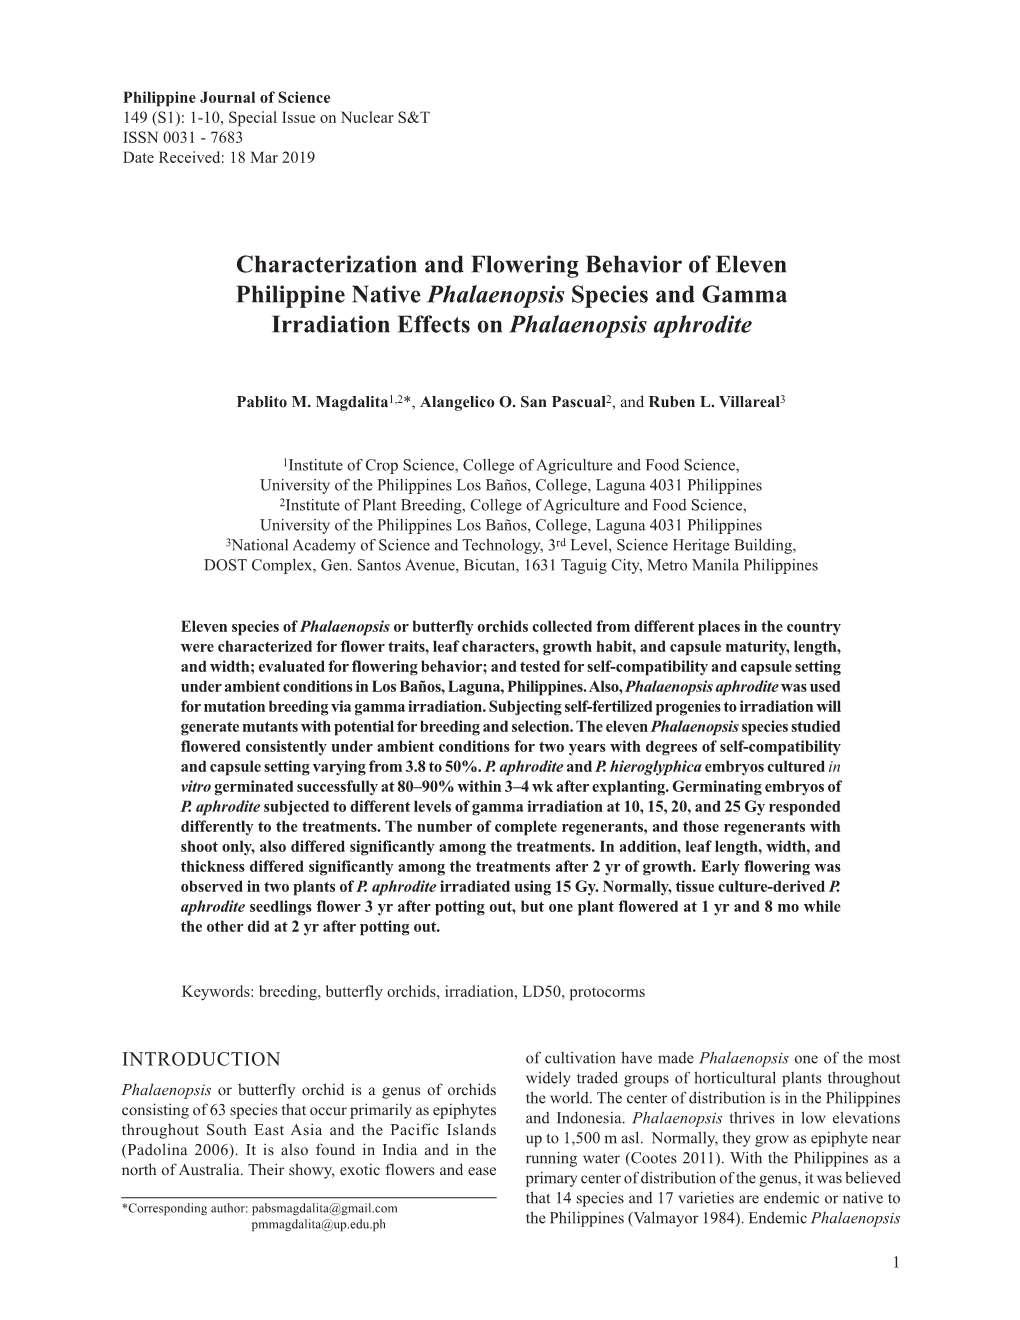 Characterization and Flowering Behavior of Eleven Philippine Native Phalaenopsis Species and Gamma Irradiation Effects on Phalaenopsis Aphrodite